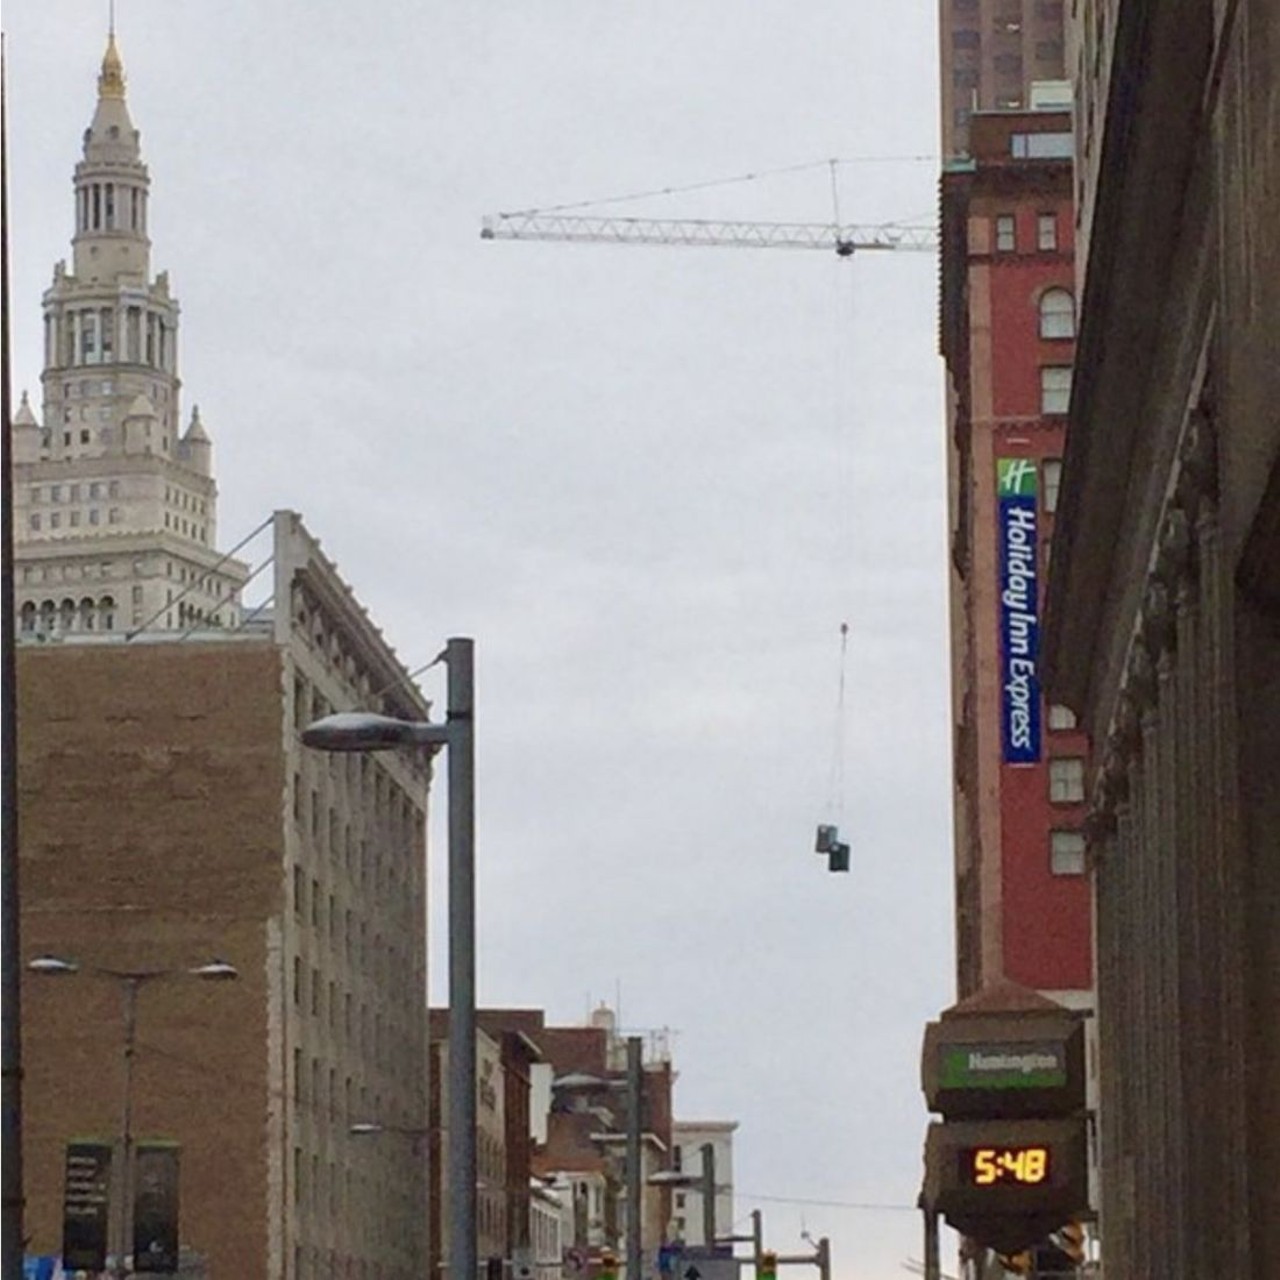  &#147;Here Are Two Porta Potties 100 Feet Over Downtown Cleveland&#148;
March 20
This could be confused with an Onion headline. But it&#146;s actually two porta-potties hanging over the city.
Photo via Scene Archives